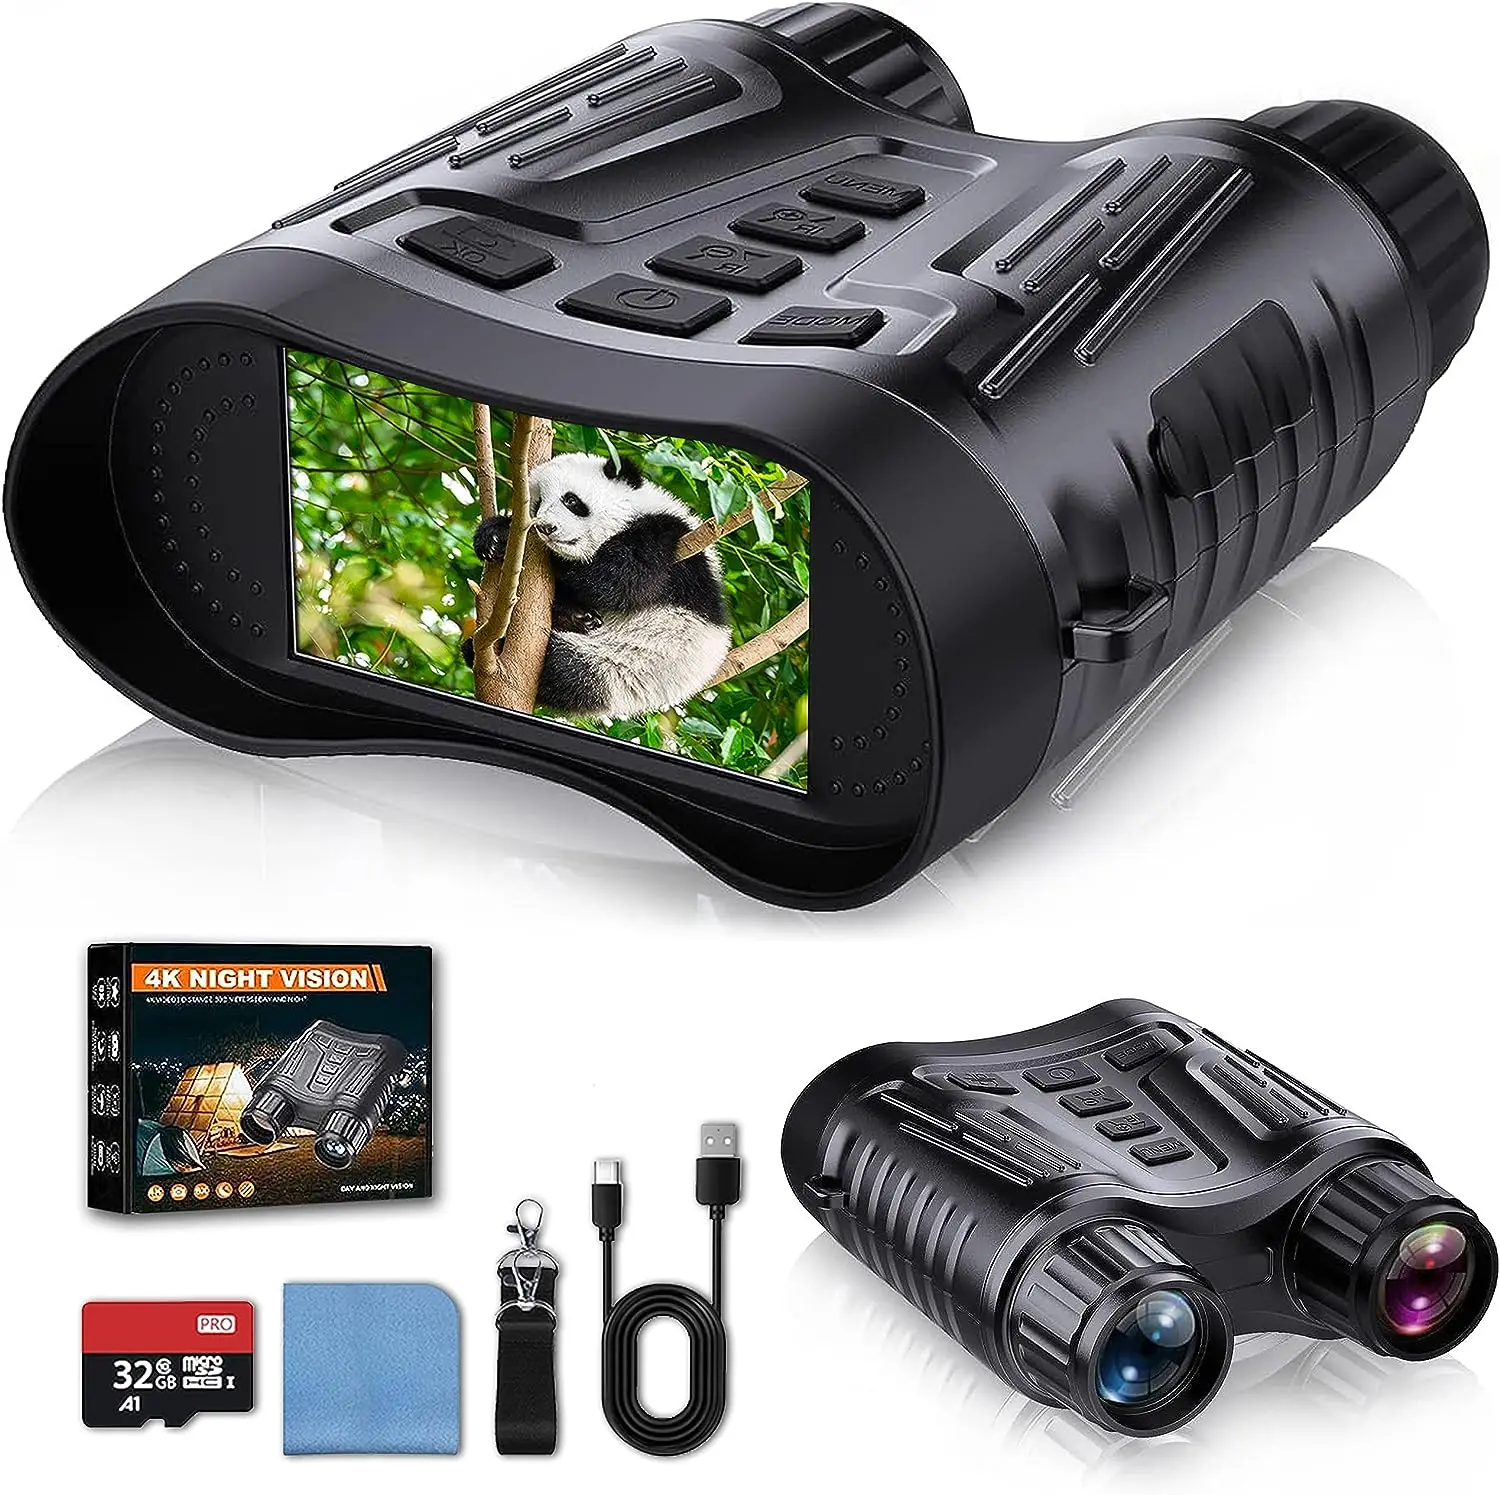 

Night Vision Goggles - 4K HD Night Vision Binoculars for Adults 32GB Card to Save Videos and Photos for Camping